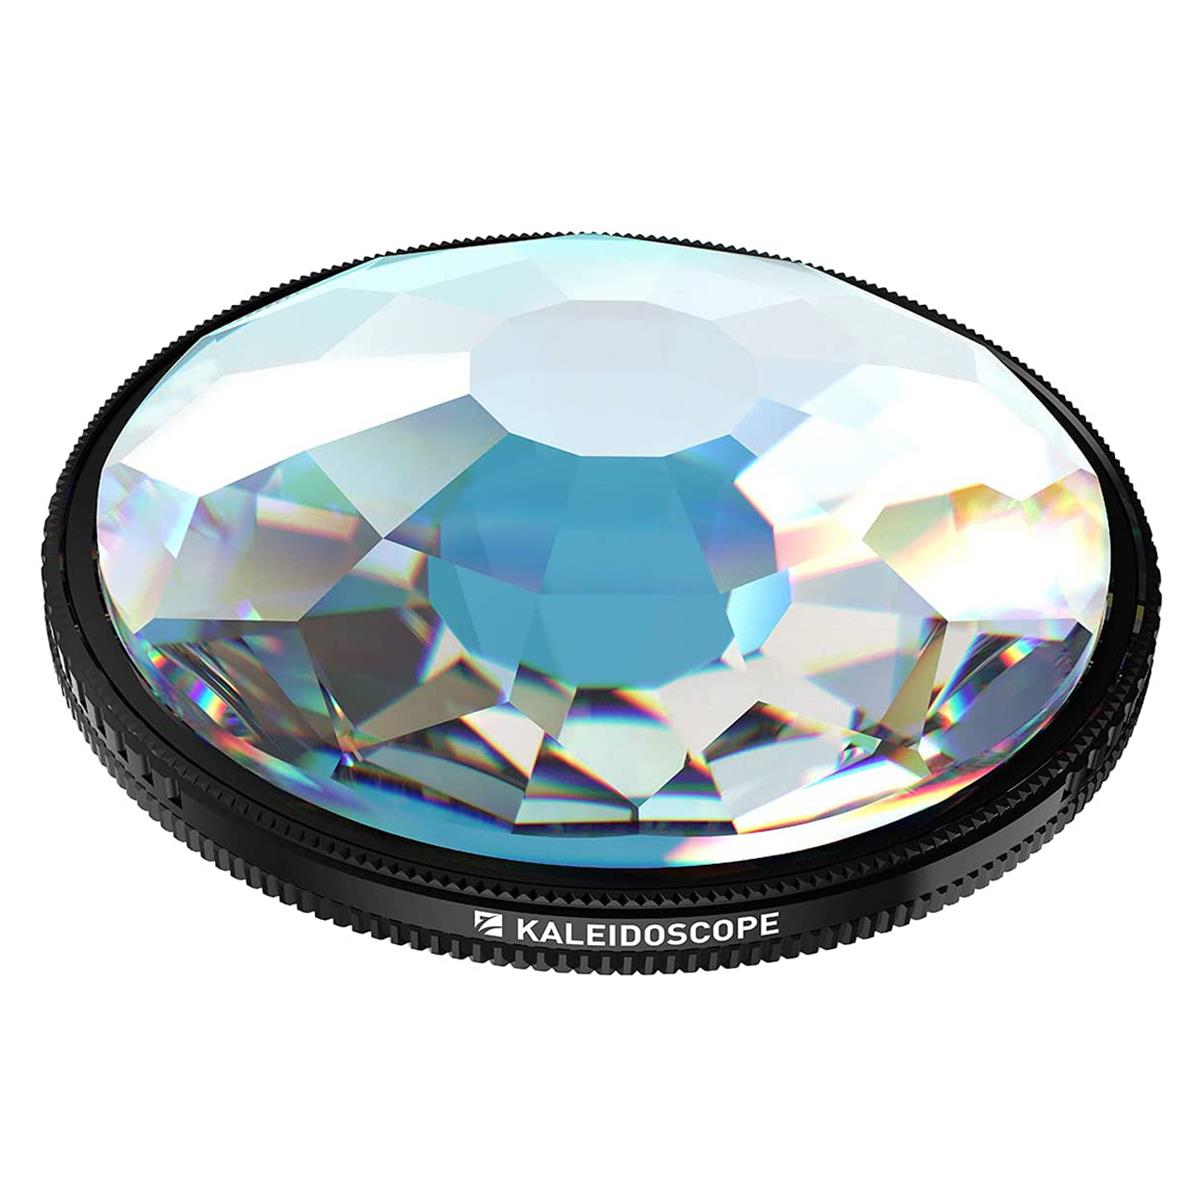 

Freewell 95mm Kaleidoscope Prism Filter